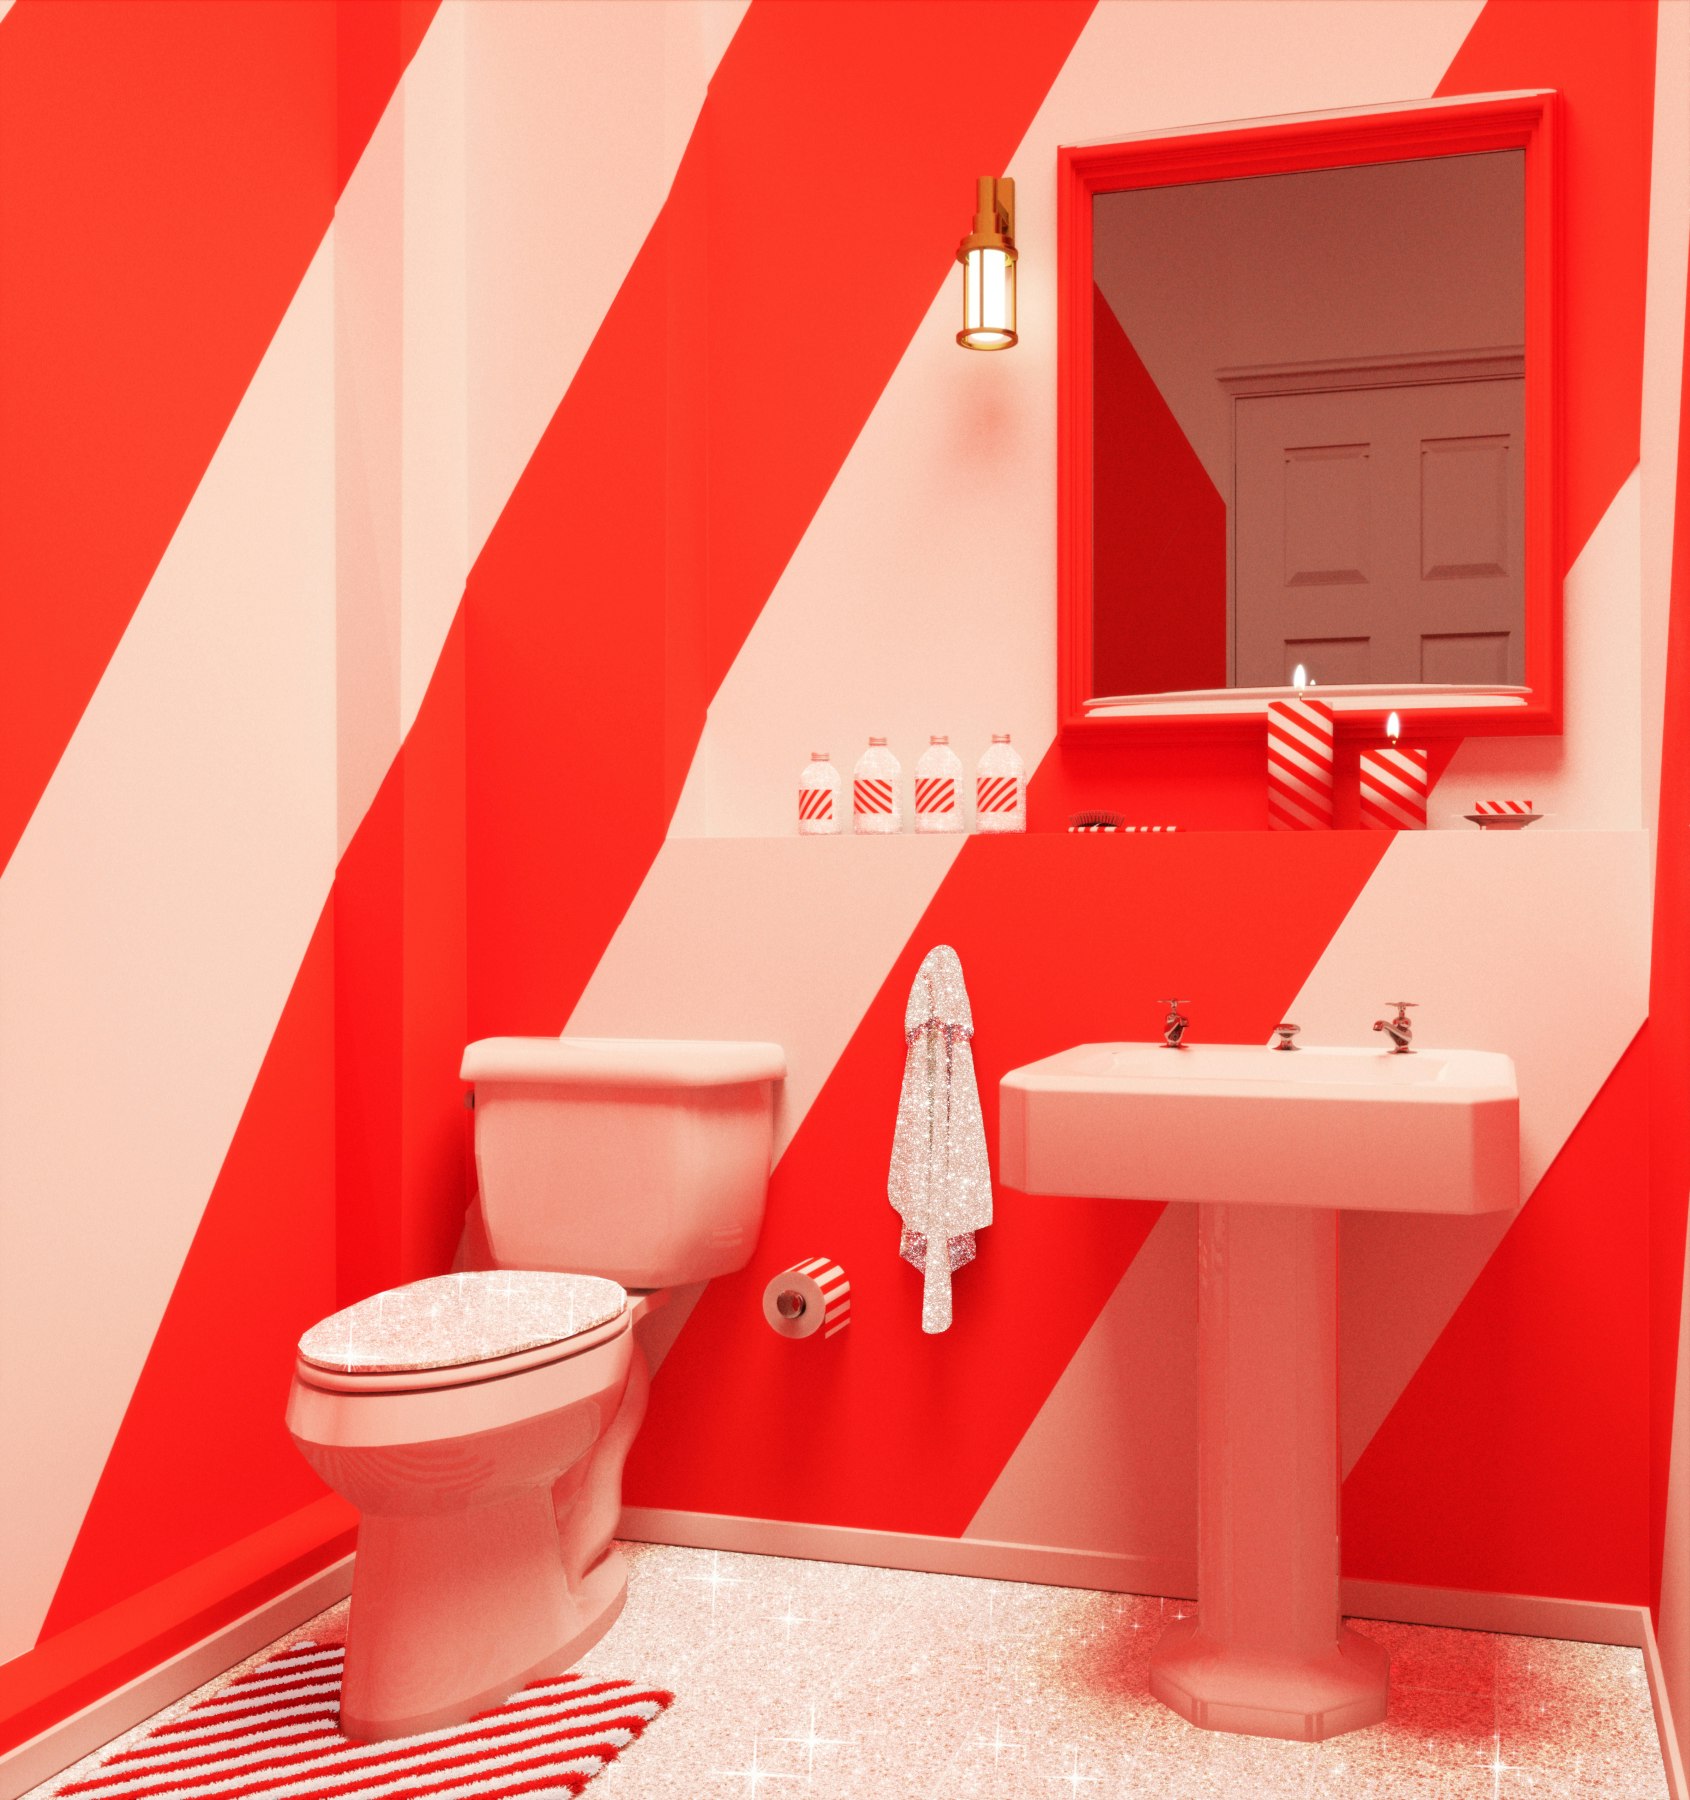 A rendering of the Candy Cane House bathroom, decorated with stripes just like a candy cane